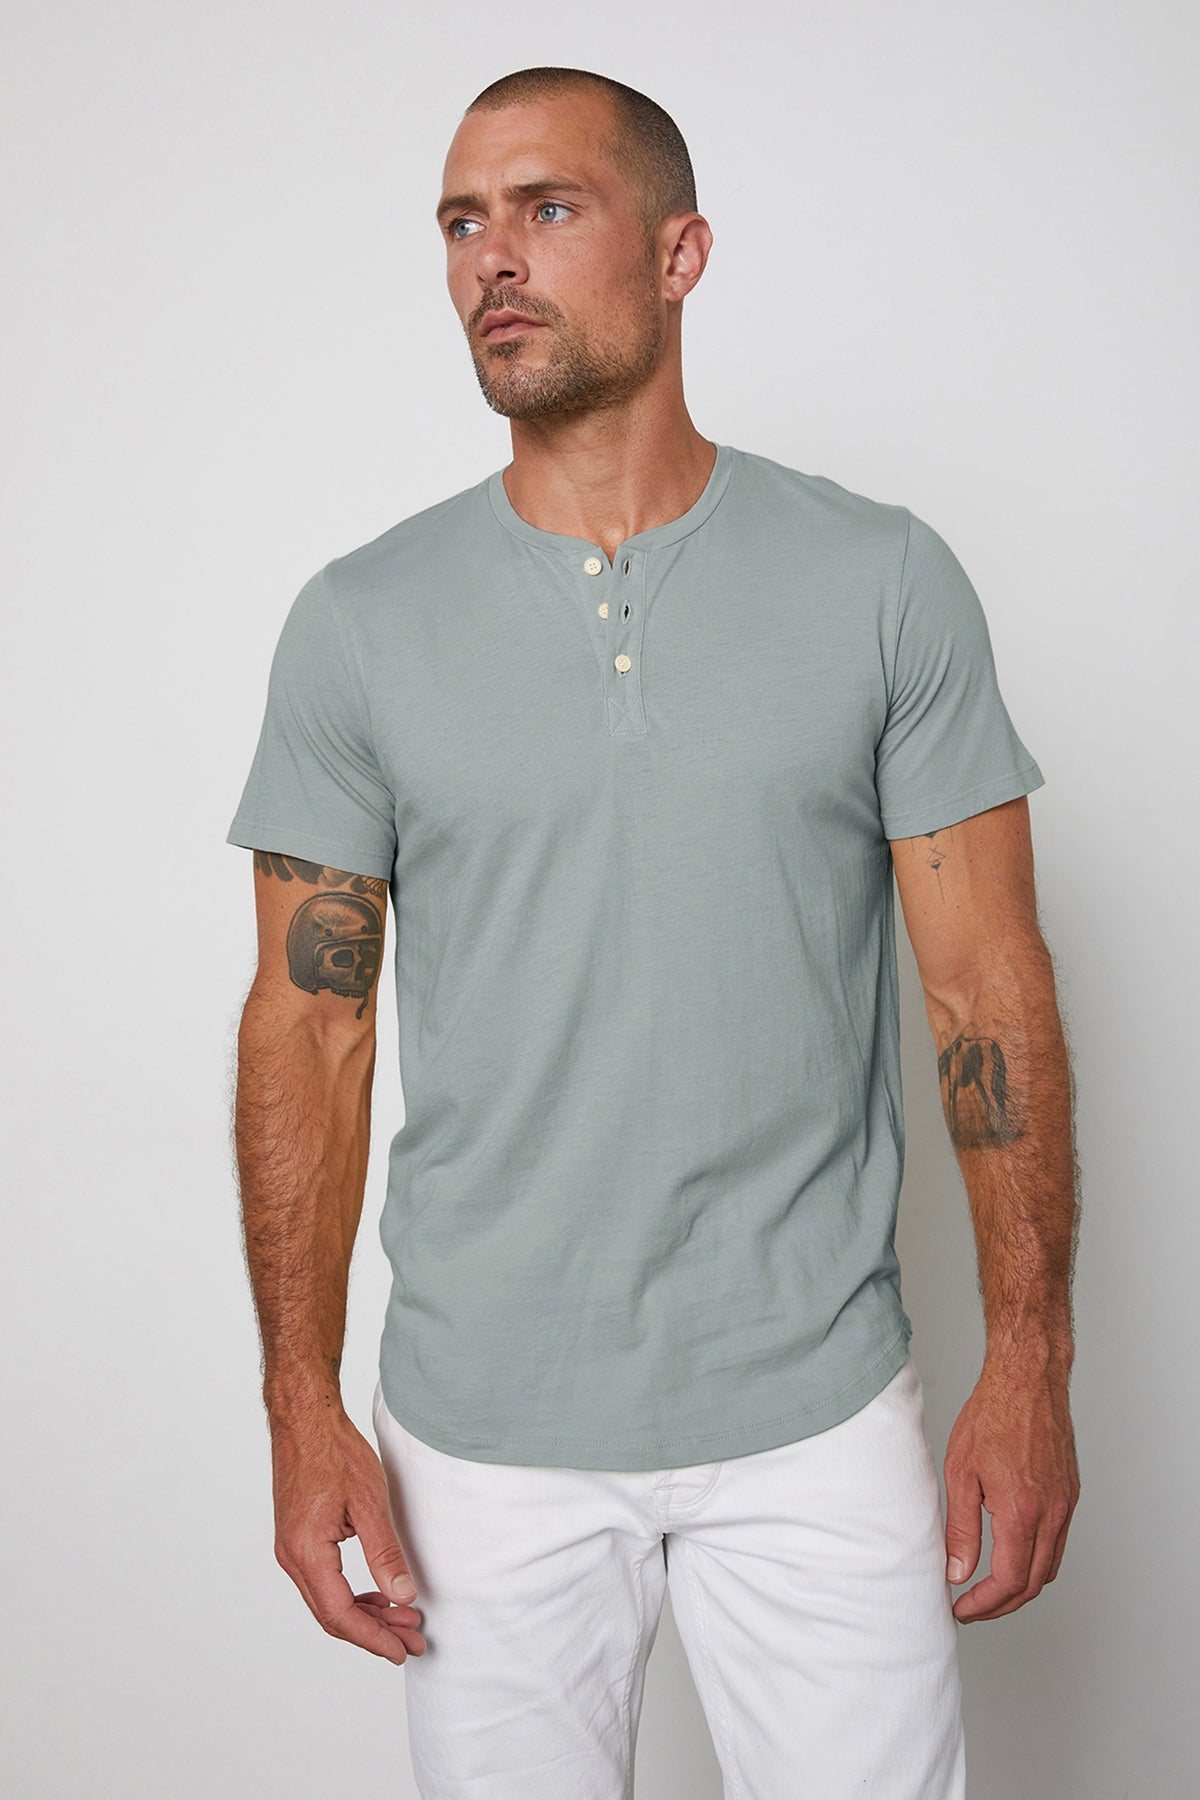 Fulton Short Sleeve Henley in ice blue with white denim front-26630310985921